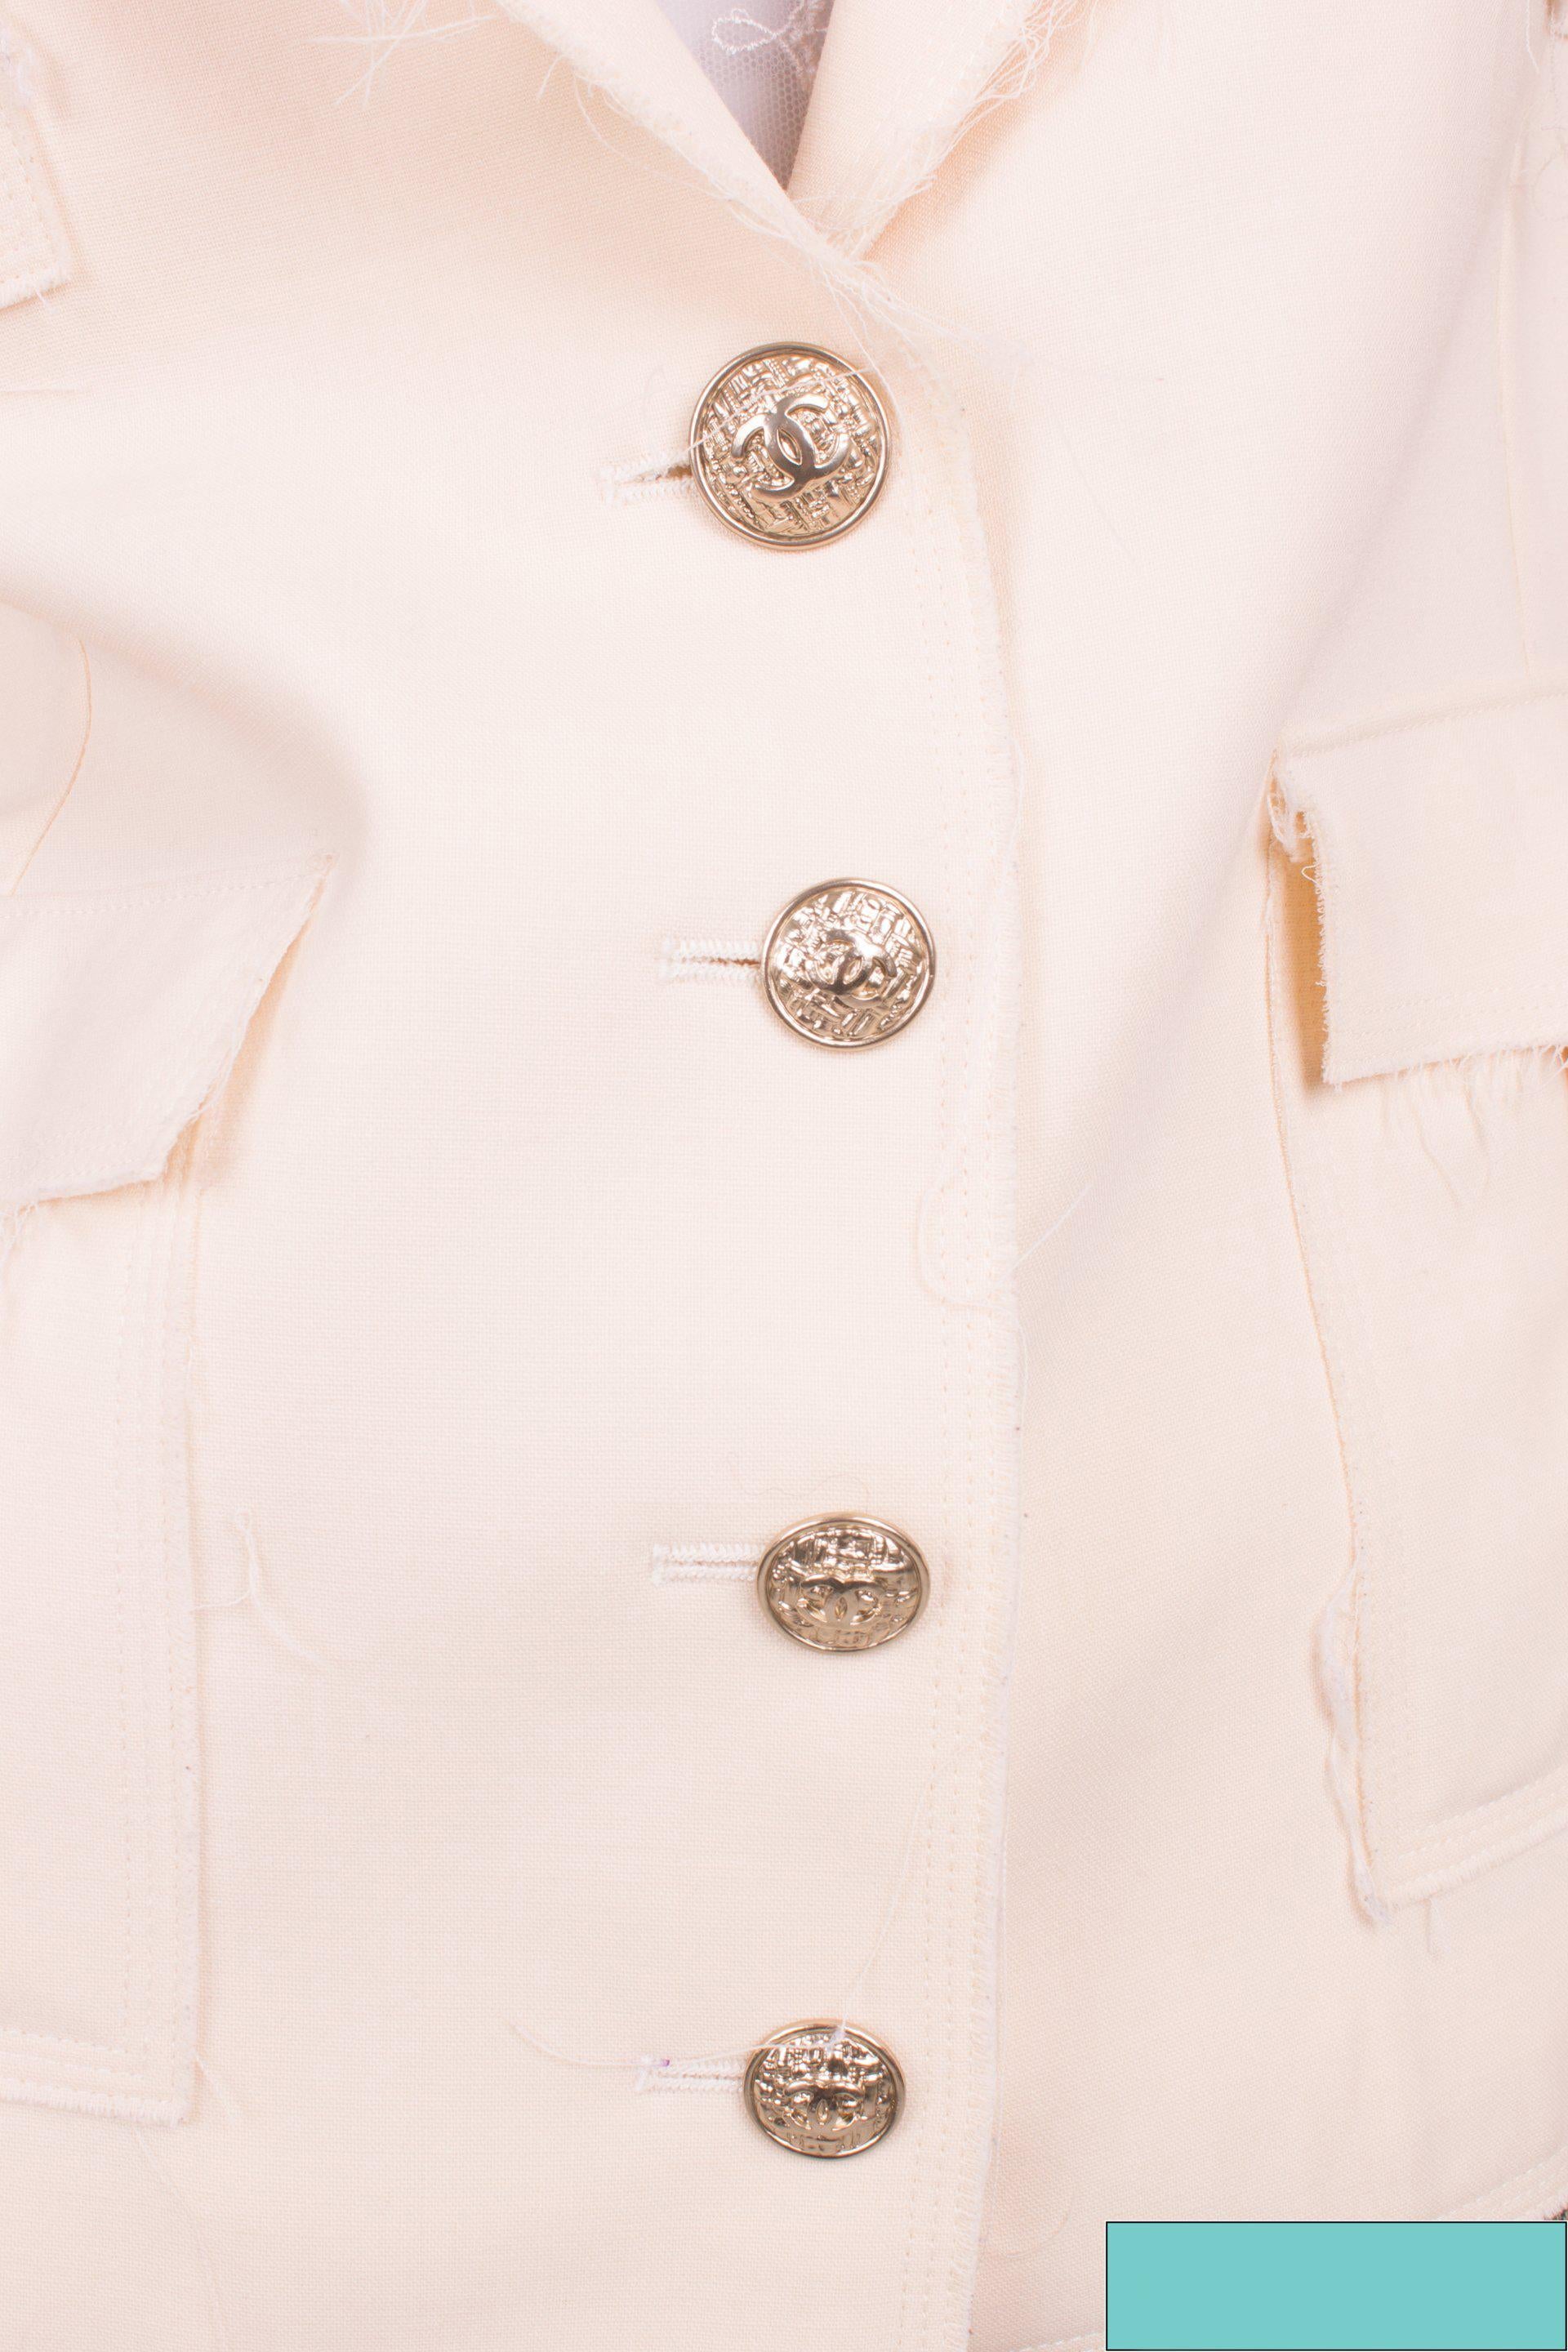 

Stirdy jacket by Chanel made of beige wool and silver buttons.

This jacket has large lapels and four-button closure at the front. The upper button is one size larger than the three underneath. An interlocking CC logo in the center. At the end of